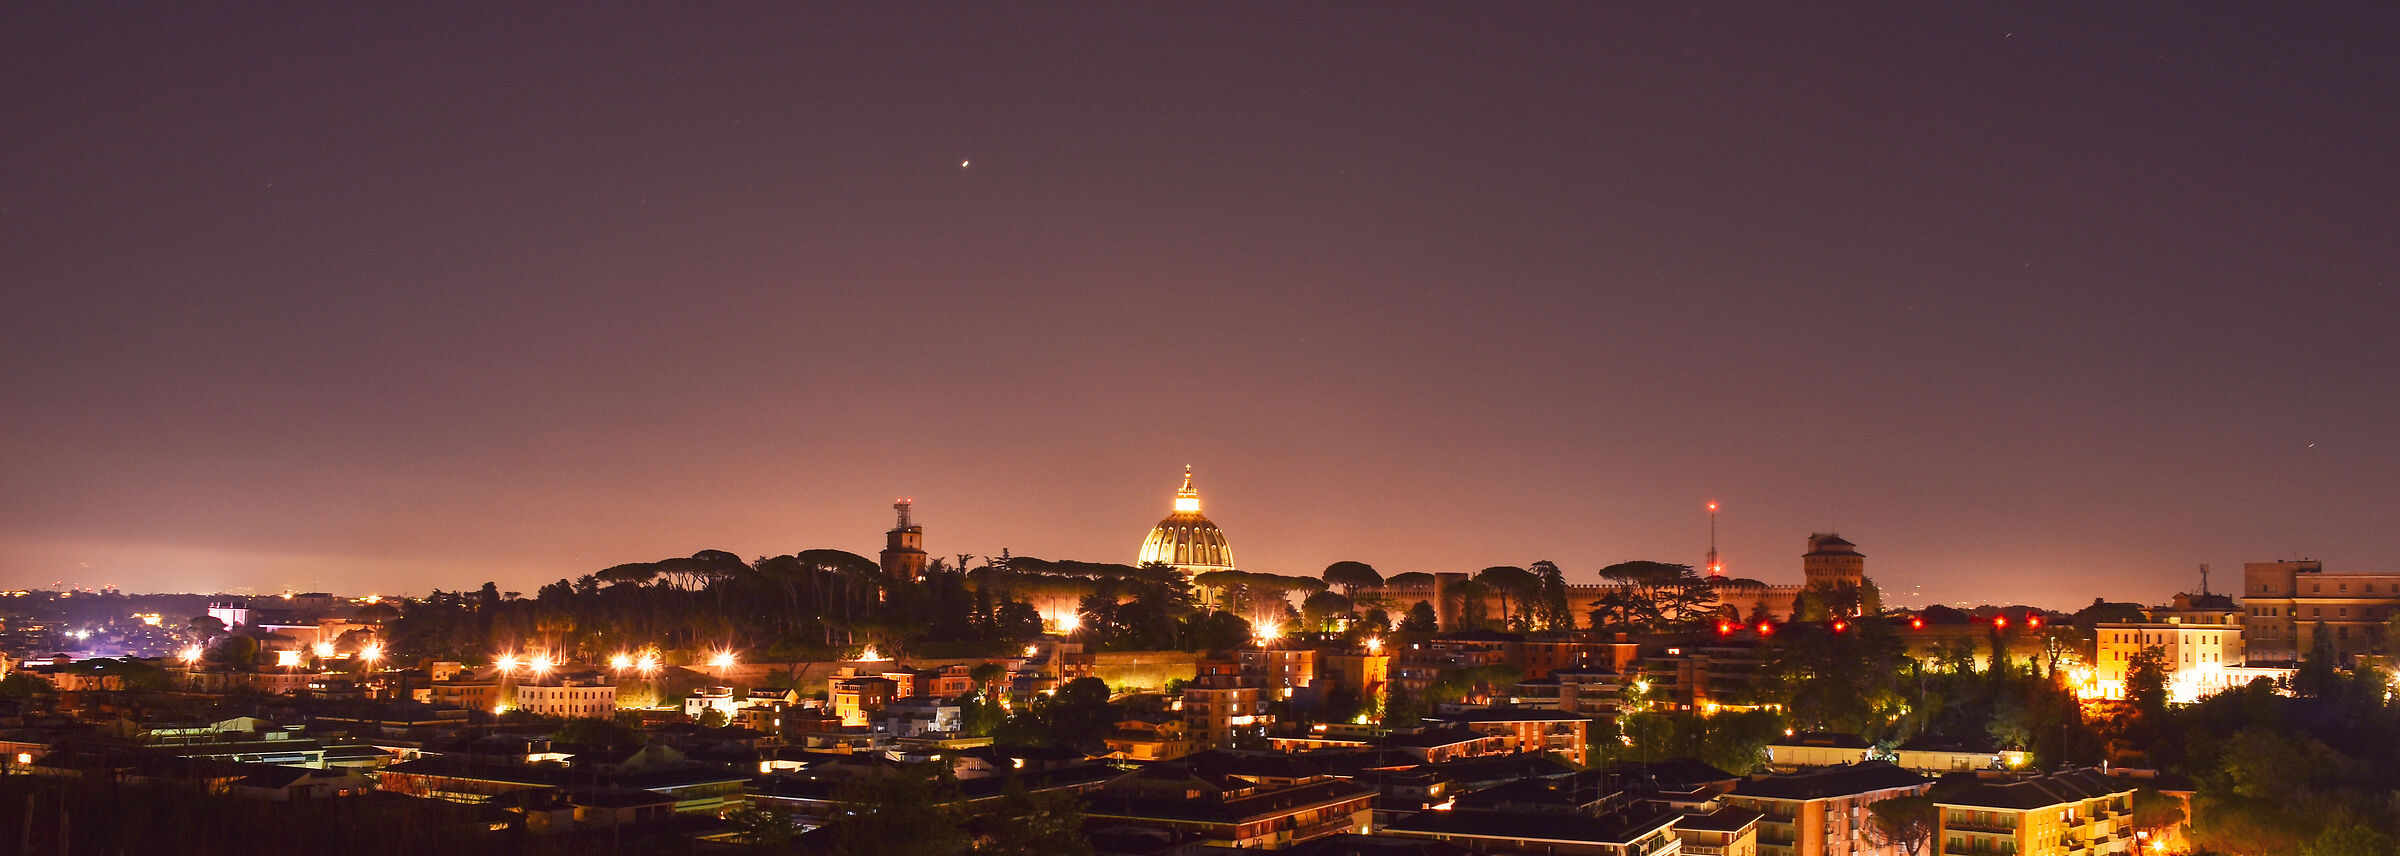 Rome by night ...